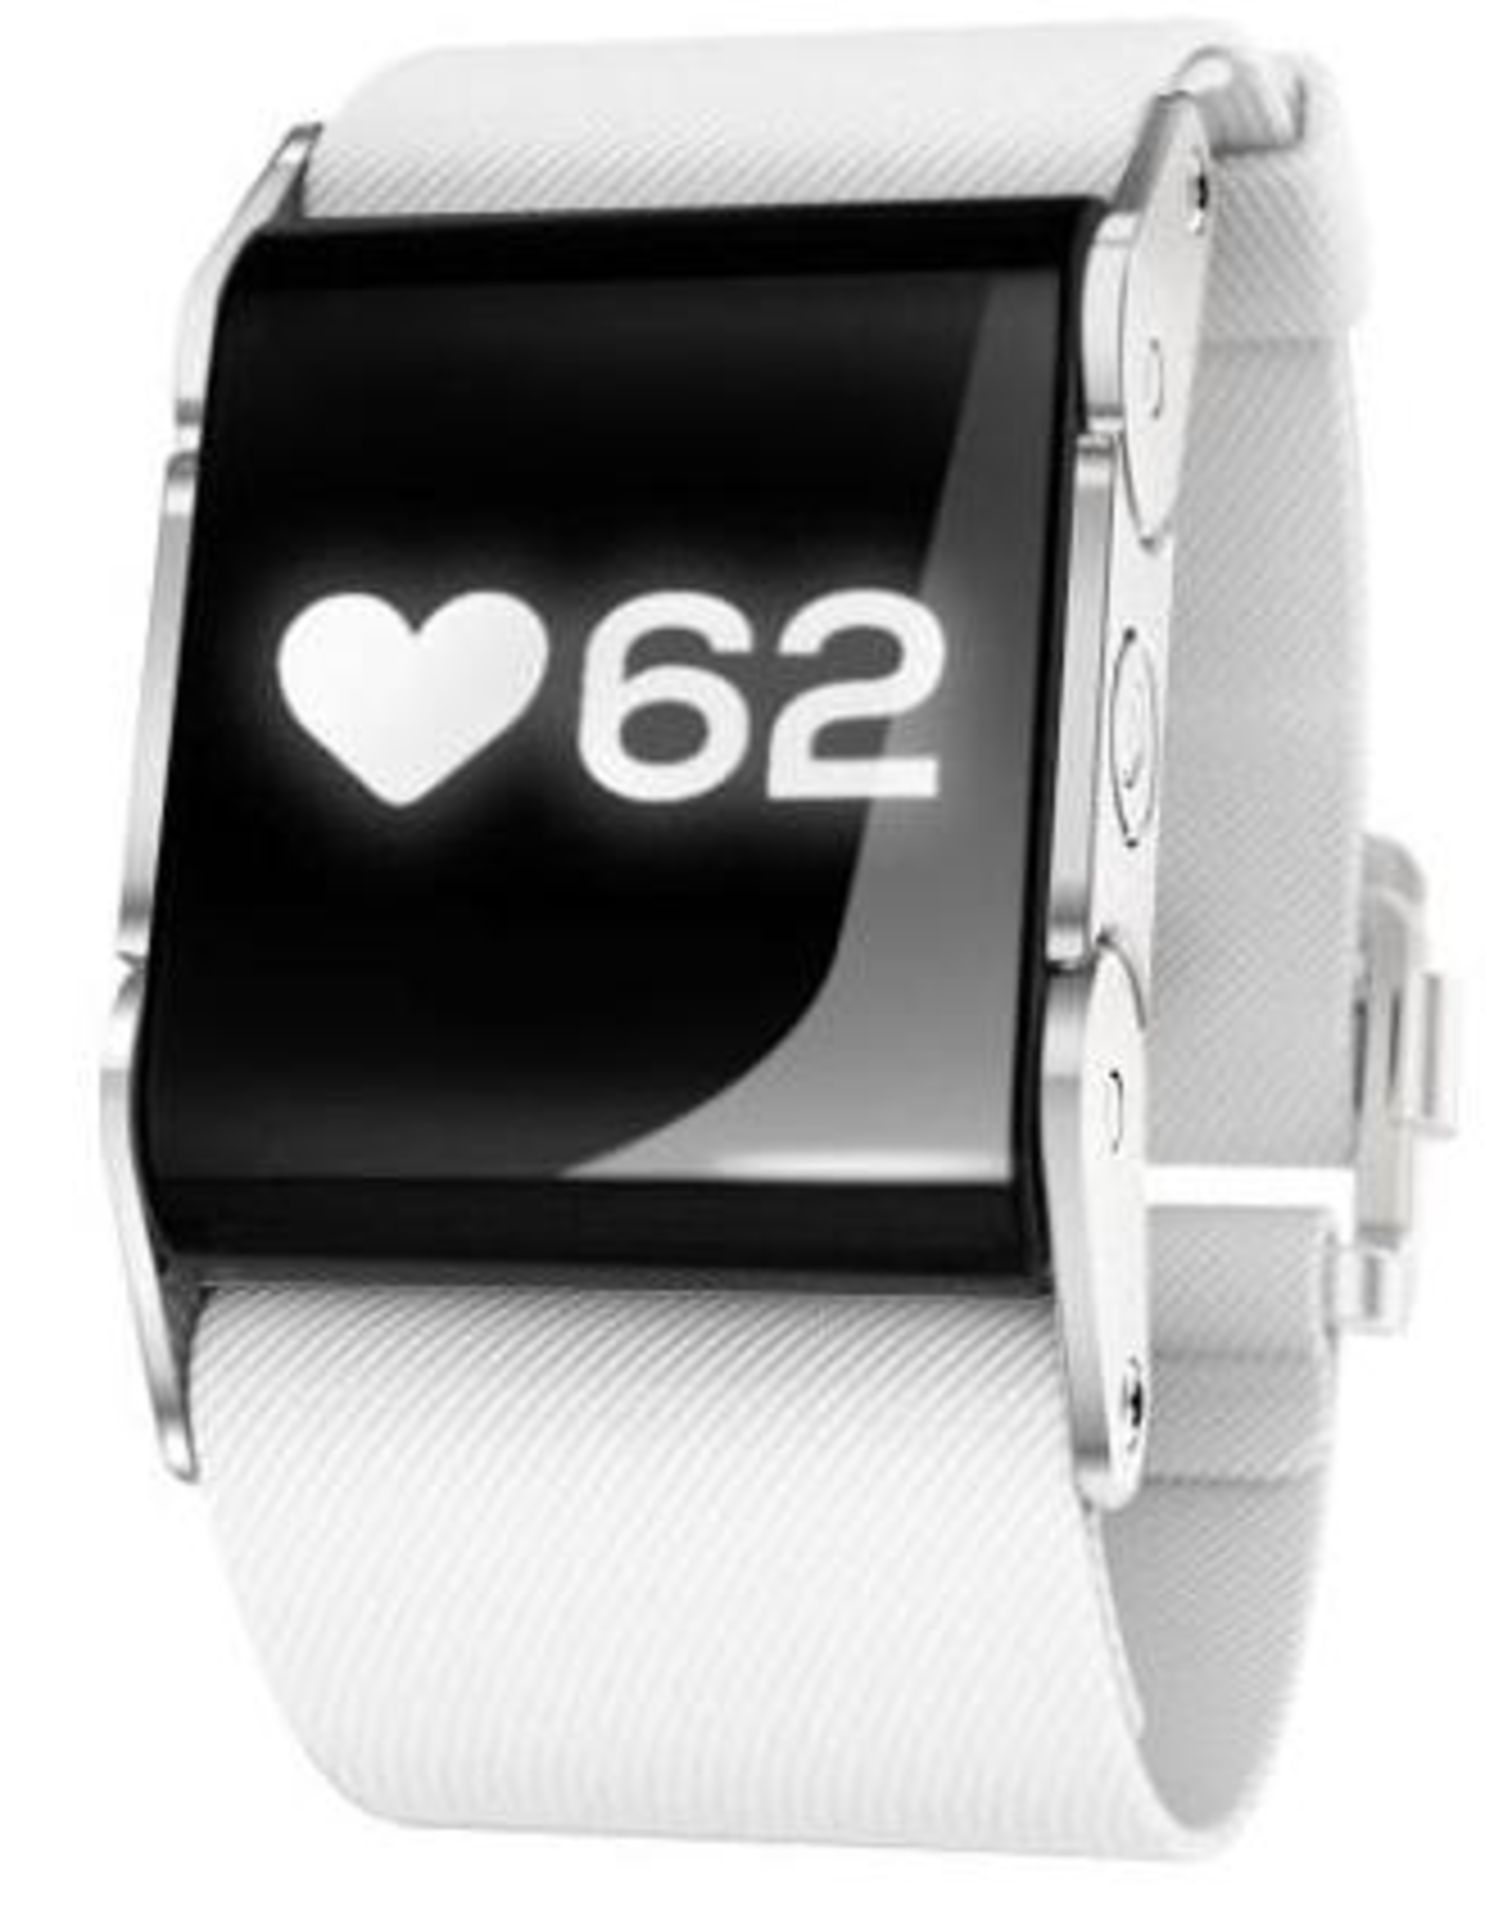 V Brand New Pulse On Heart Rate Wrist Band - App Connectivity - Measures Training effect - Fitness